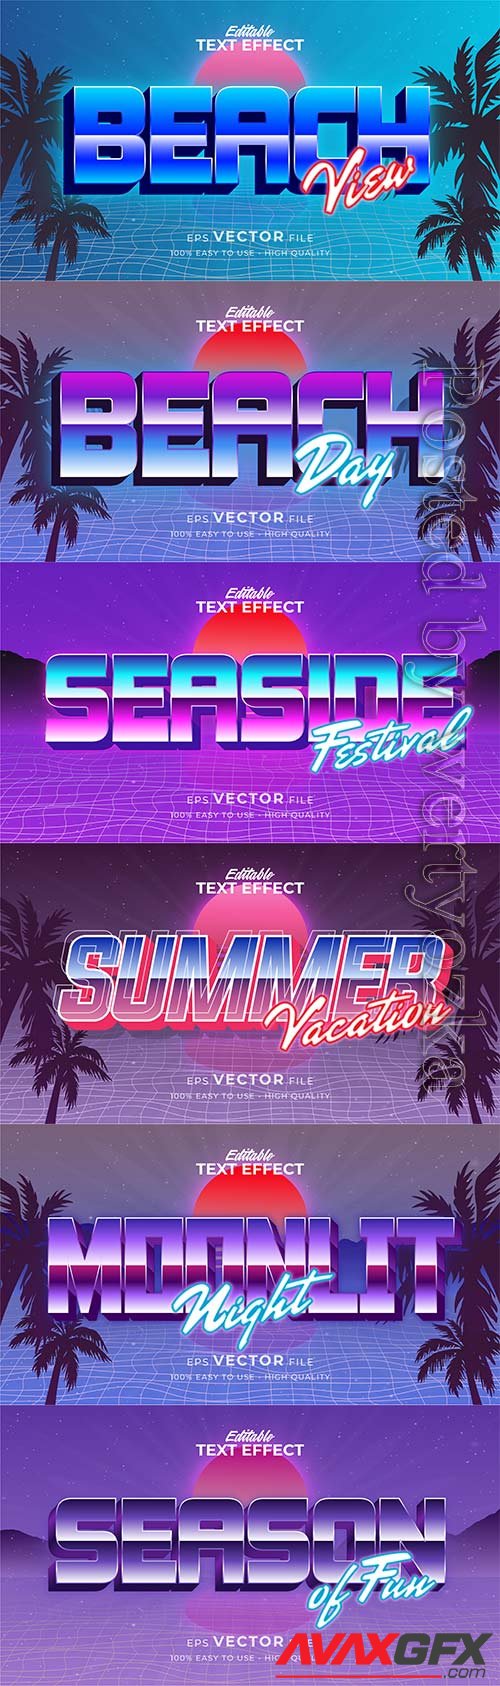 Text style effect, retro summer text in grunge style vol 6